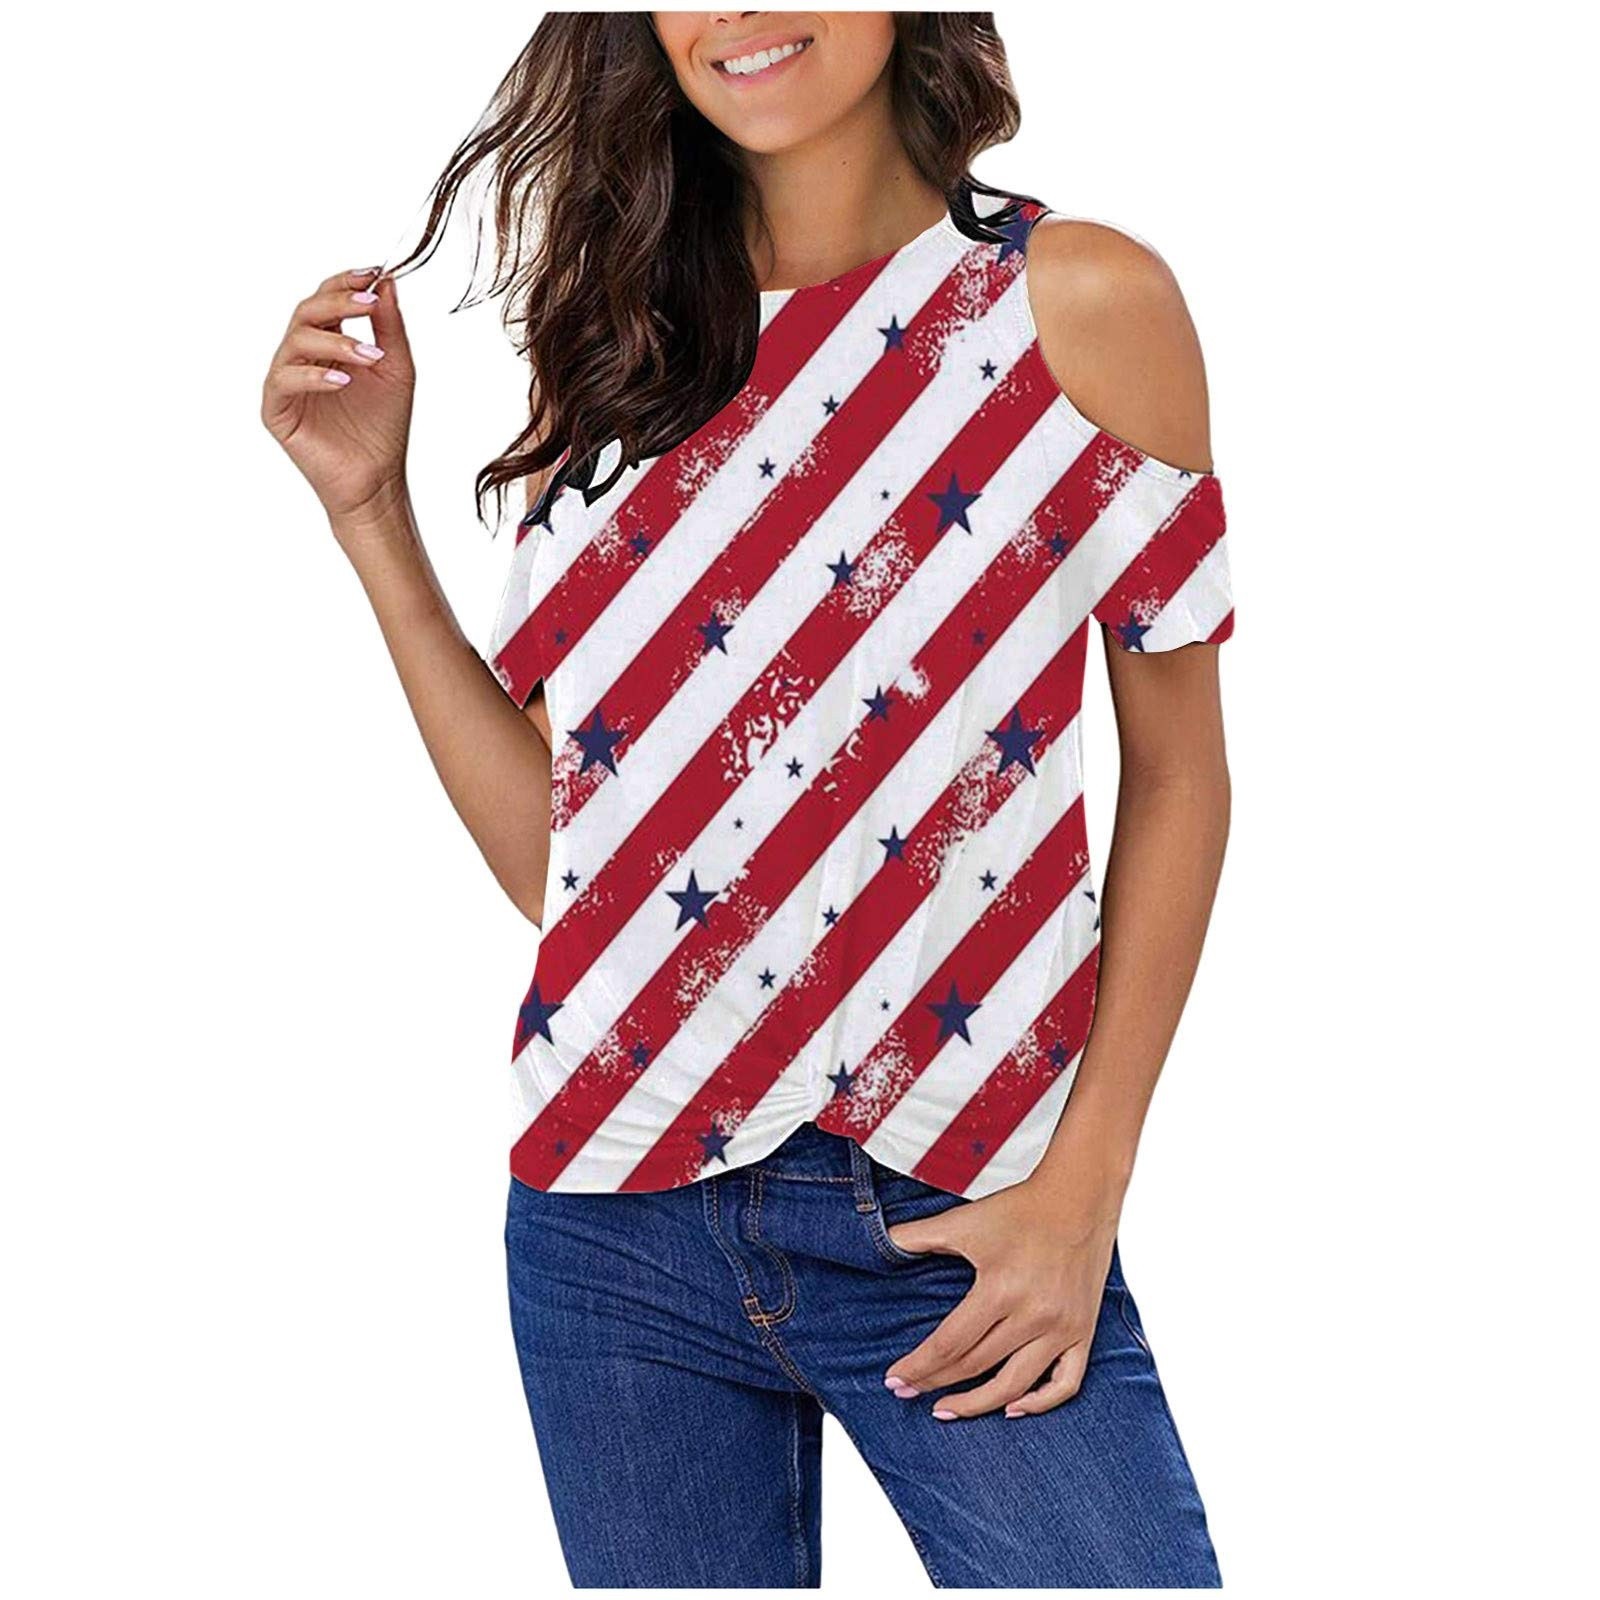 Ganfancp 4th of July Shirts for Women Cold Shoulder Tops Off the ...